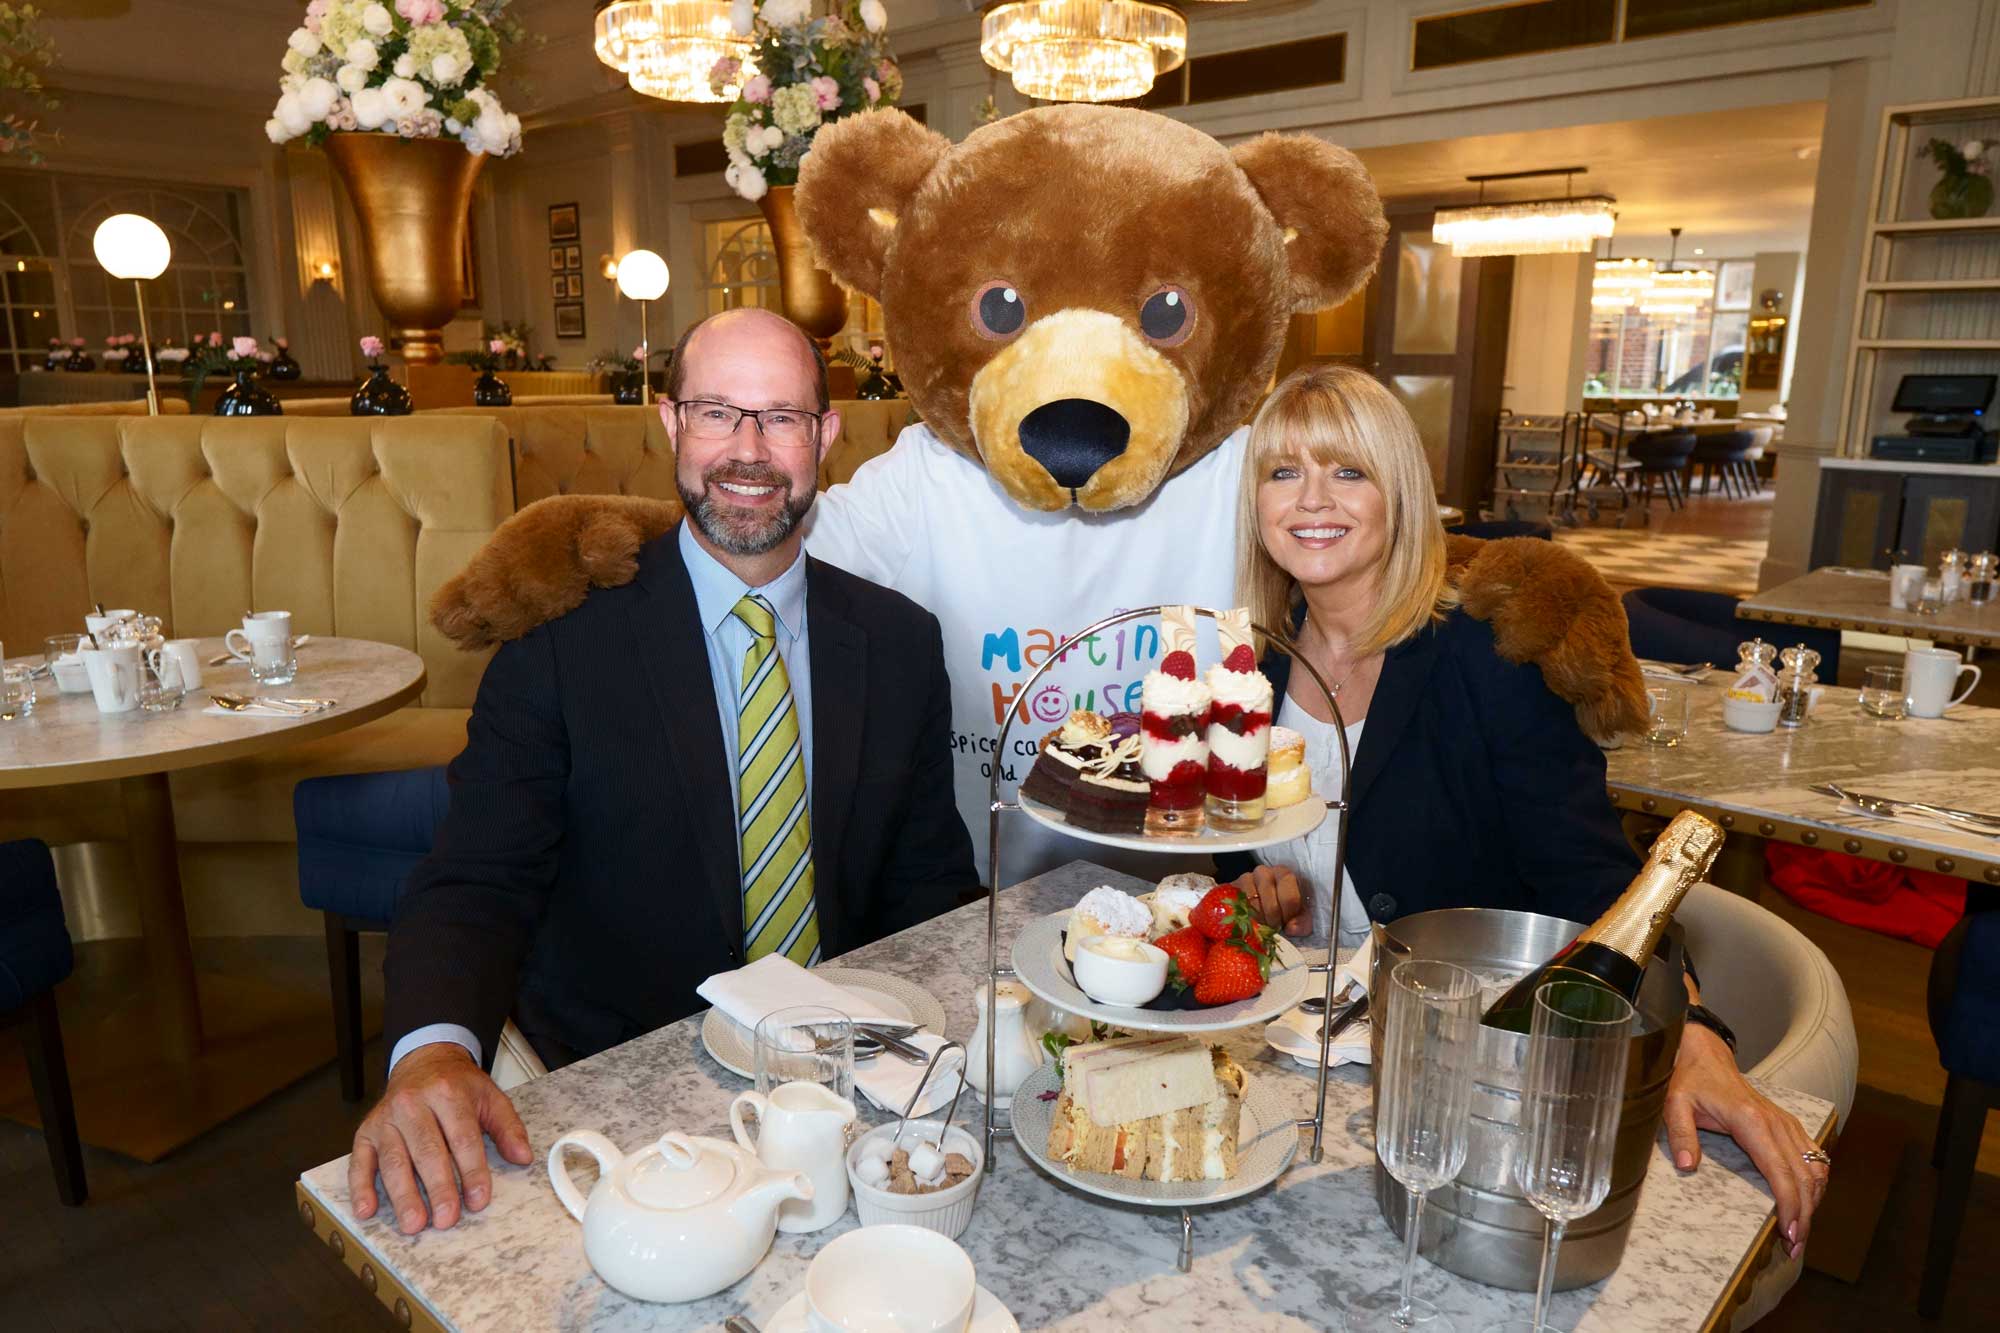 Tea Up! Martin House Children’s Hospice ambassador, Christine Talbot, is joined for afternoon tea at the Majestic Hotel by general manager, Matthew Hole, and Martin House mascot, Marty Bear